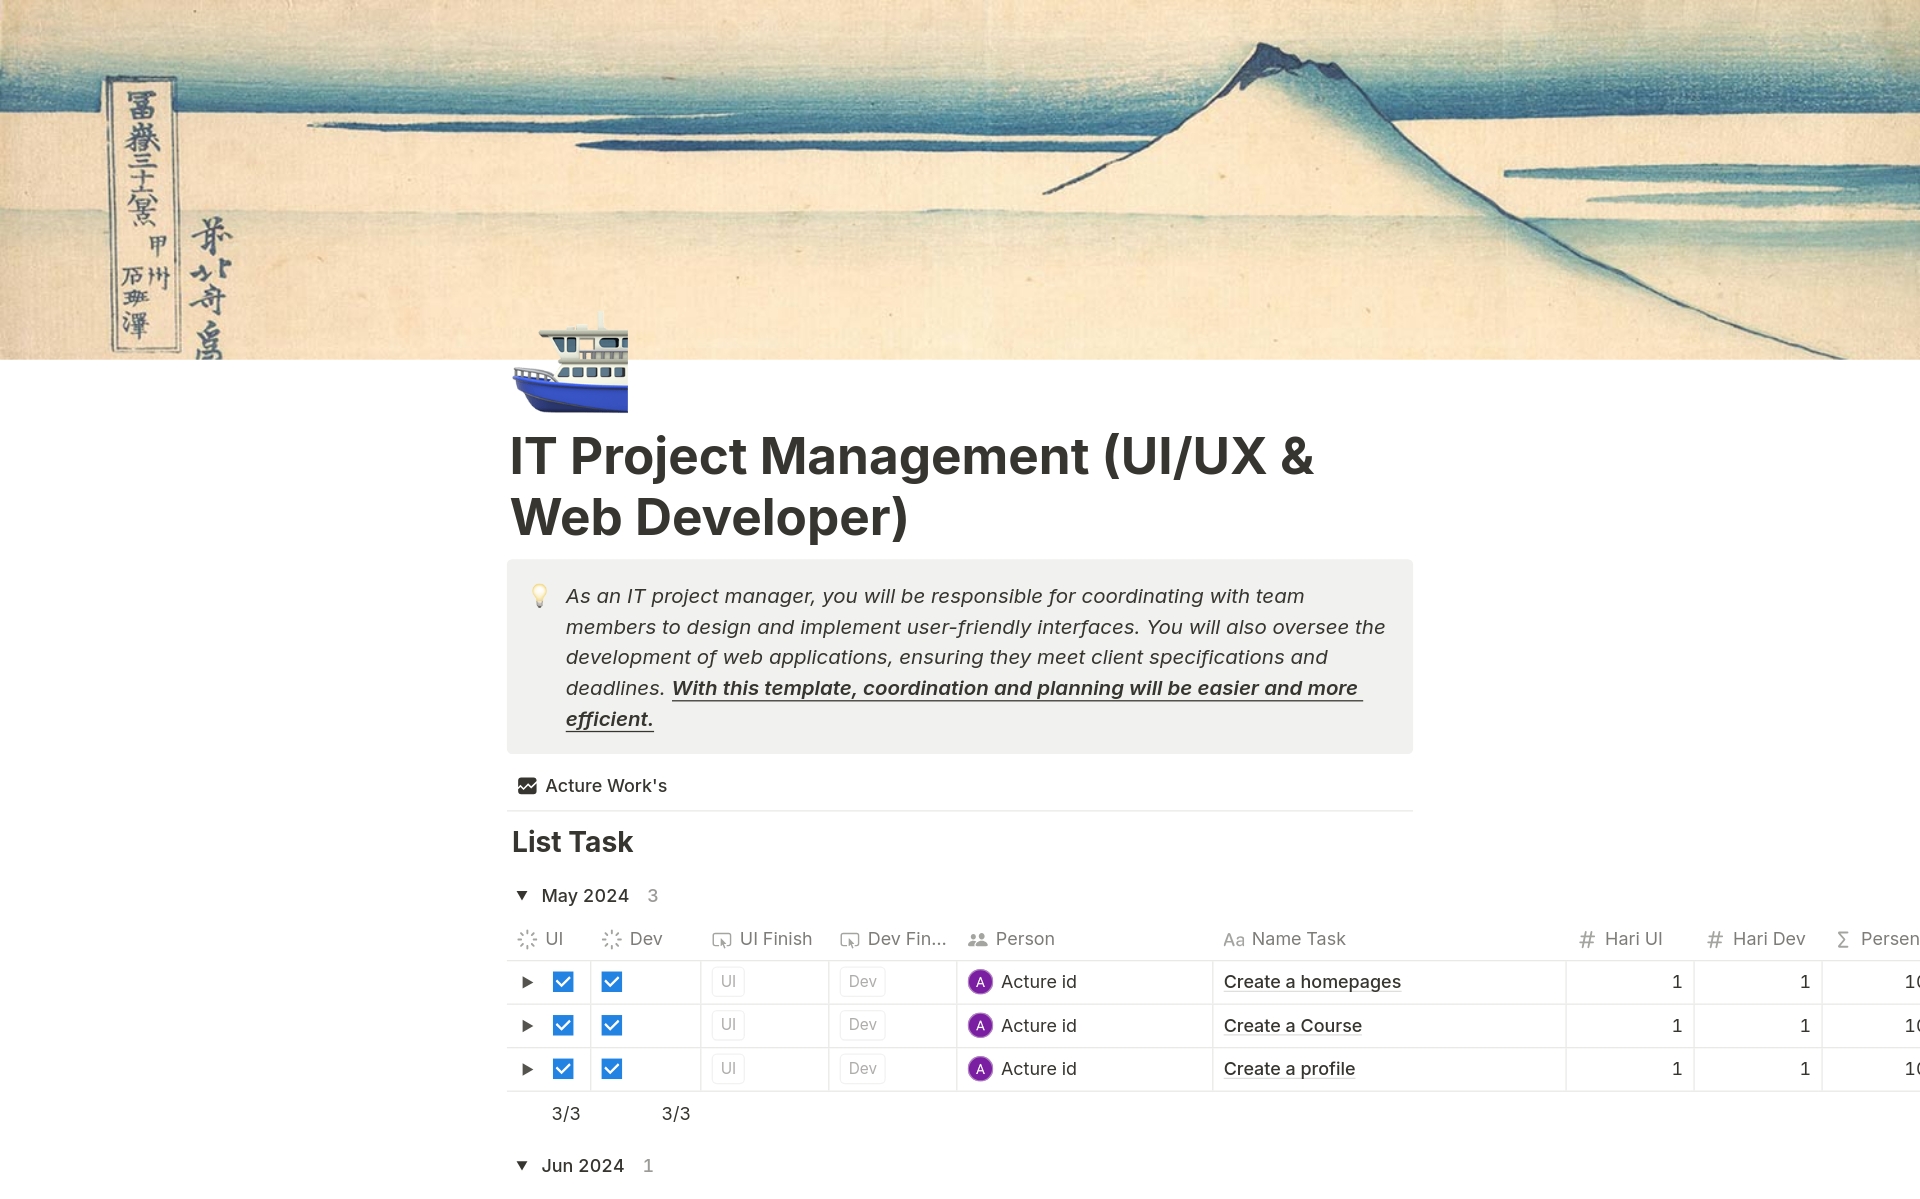 As an IT project manager, you will be responsible for coordinating with team members to design and implement user-friendly interfaces. With this template, coordination and planning will be easier and more efficient.